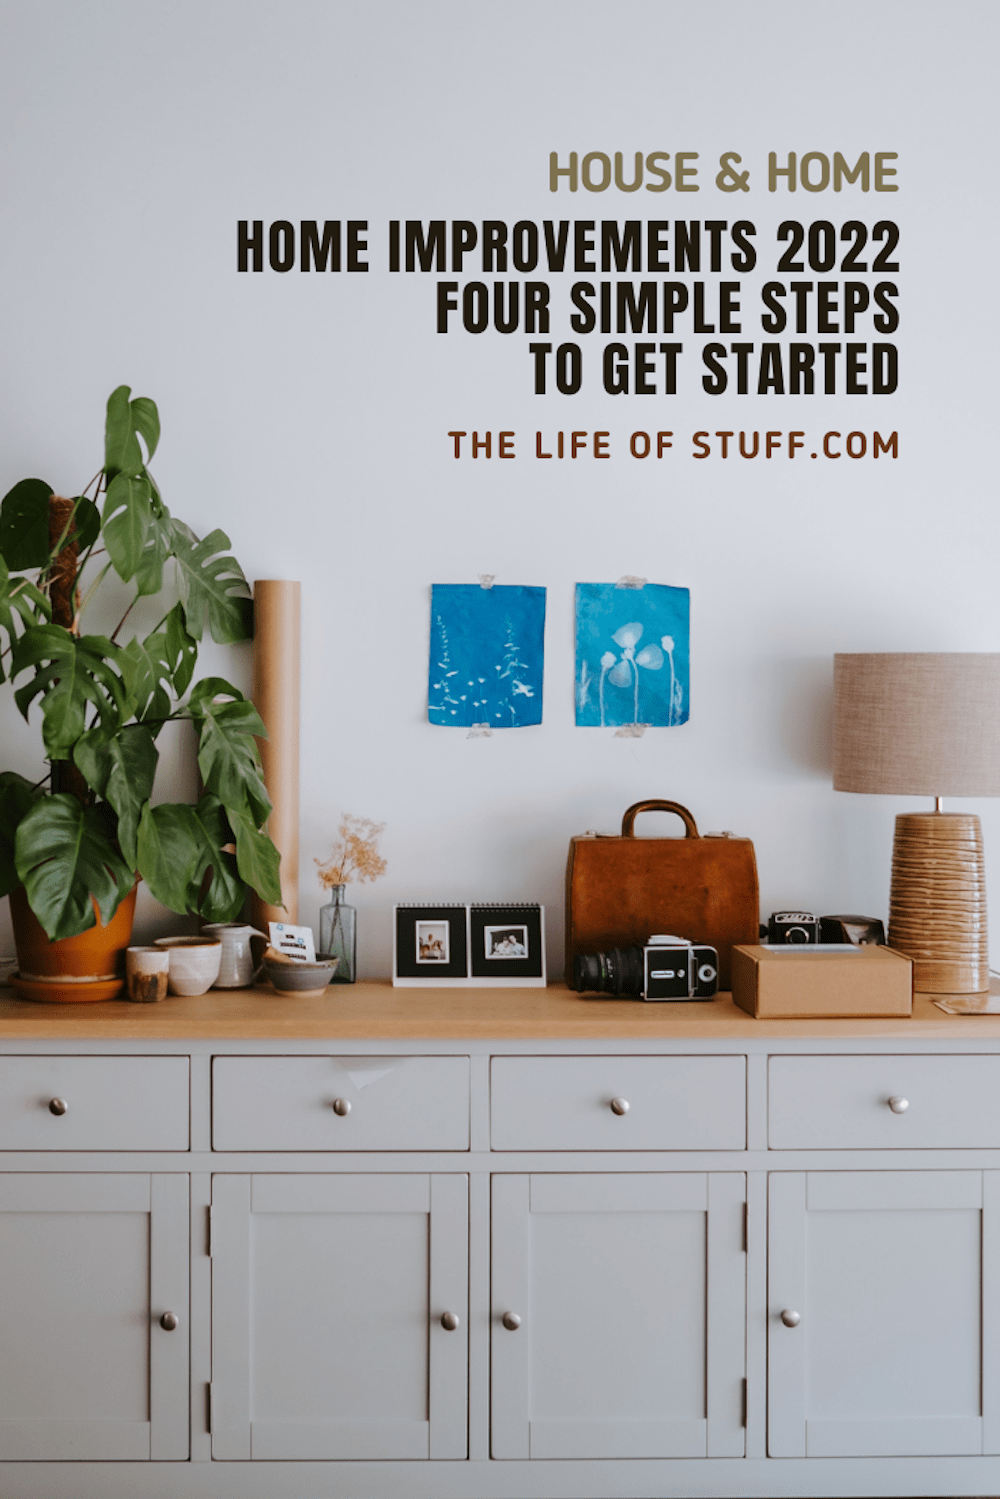 Home Improvements 2022 - Four Simple Steps to Get Started - The Life of Stuff